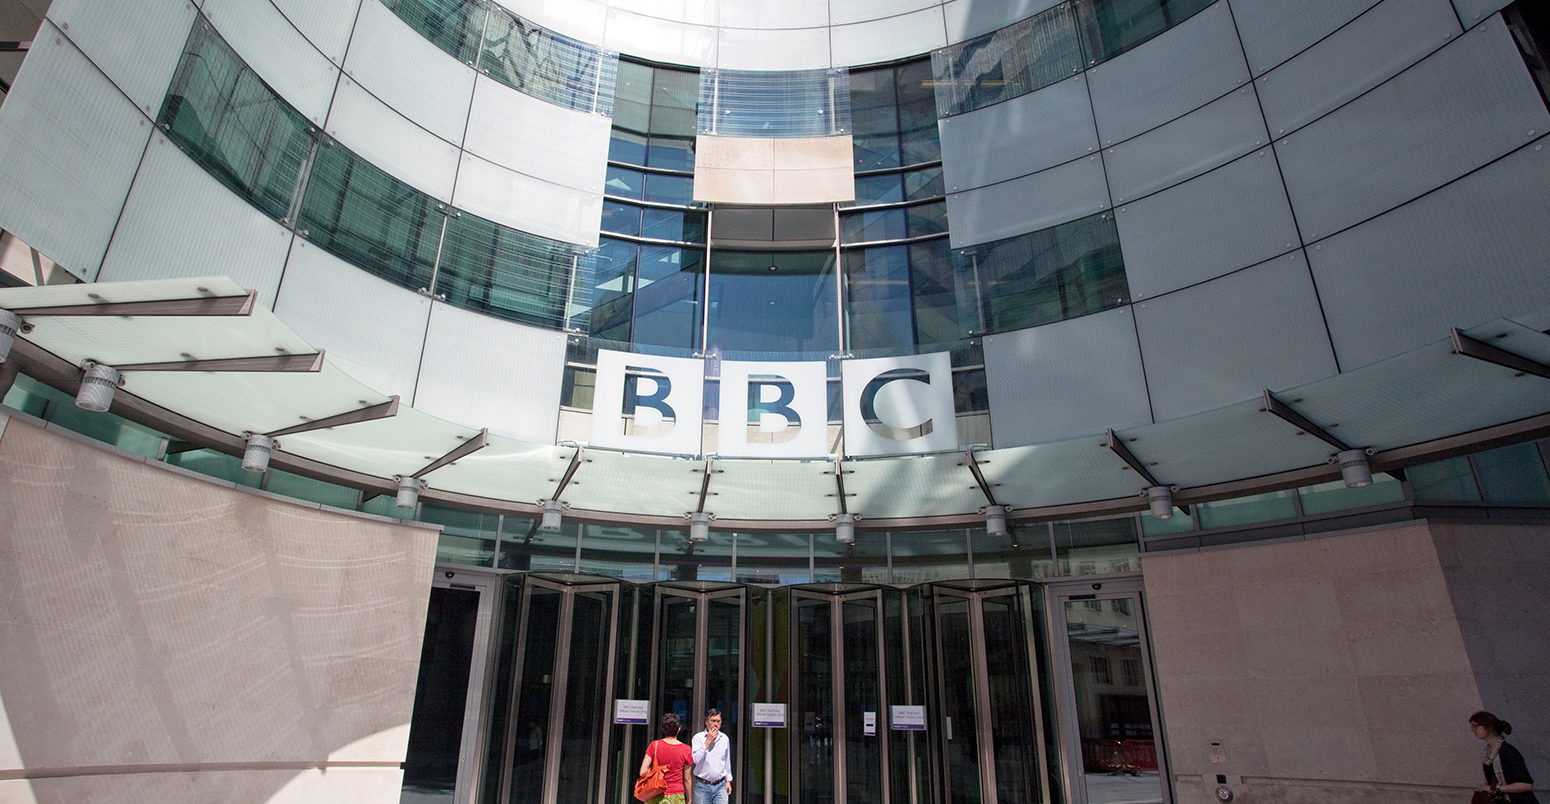 Exclusive: BBC issues internal guidance on how to report ...